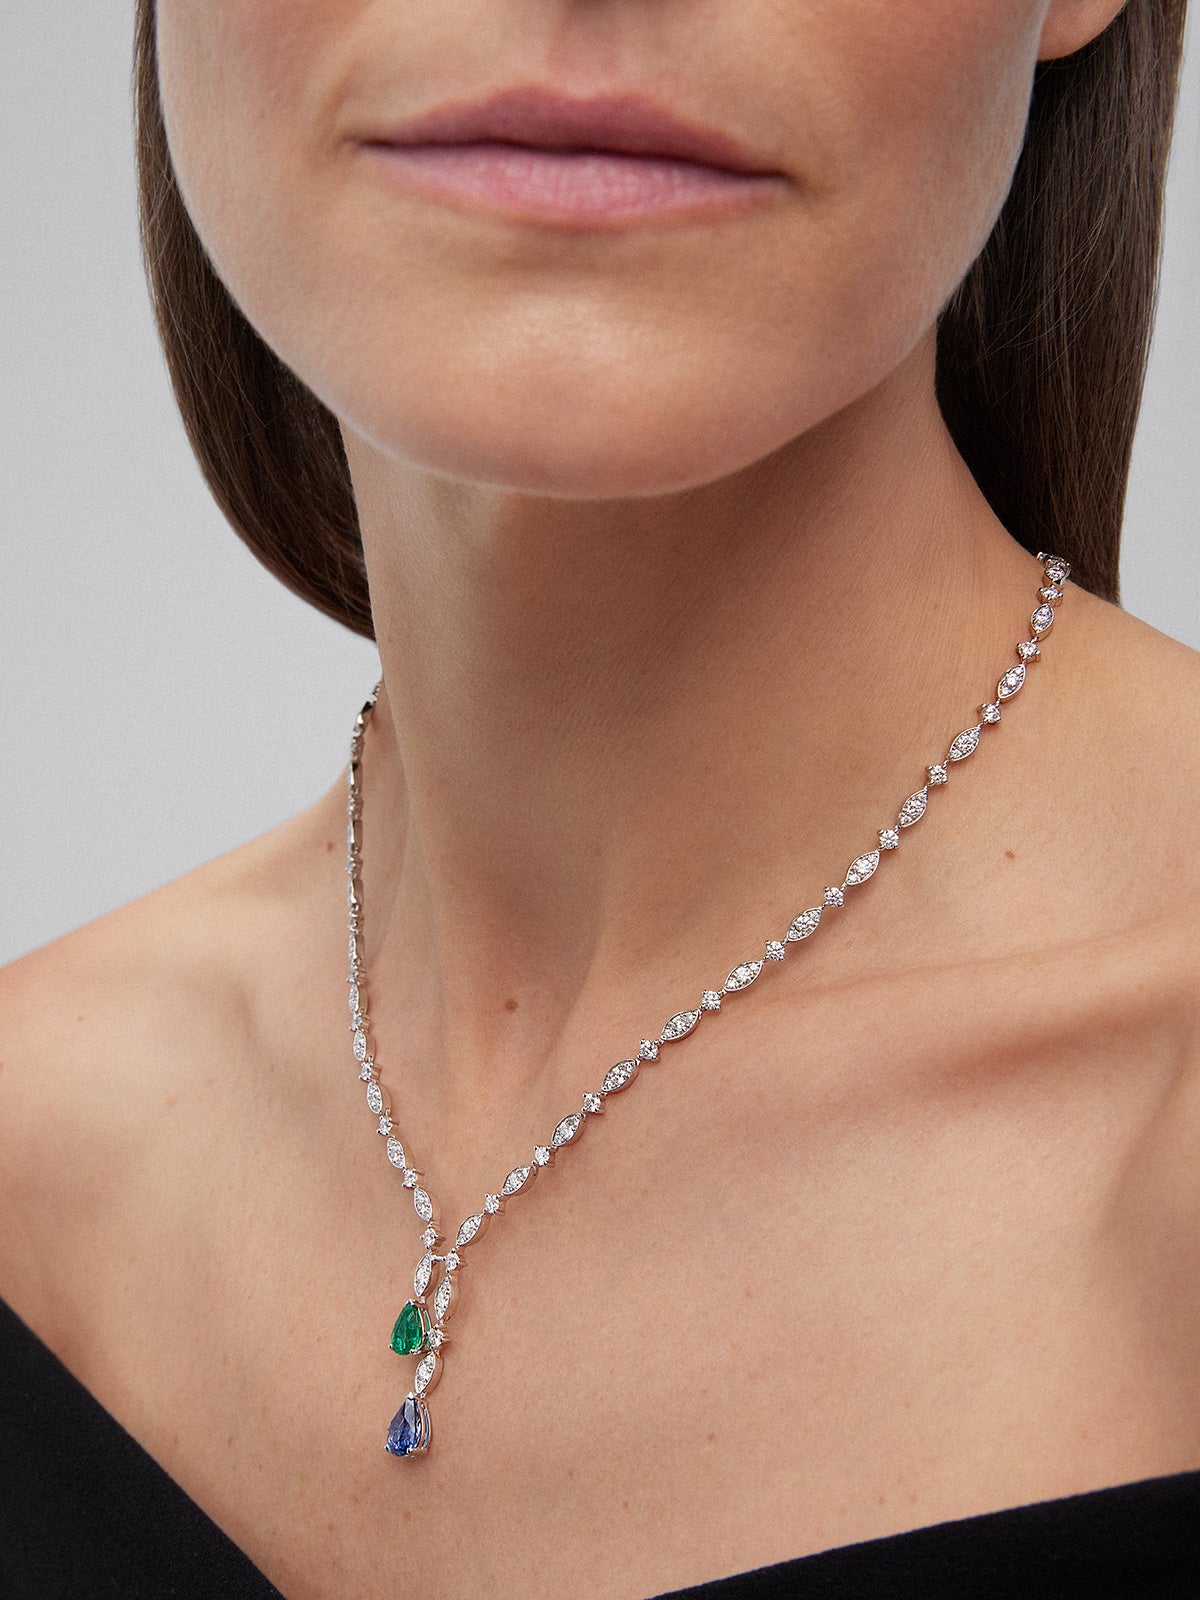 18K white gold necklace with 1.76 ct pear-cut intense blue sapphire, 0.96 ct pear-cut green emerald and 6.48 ct brilliant-cut diamonds